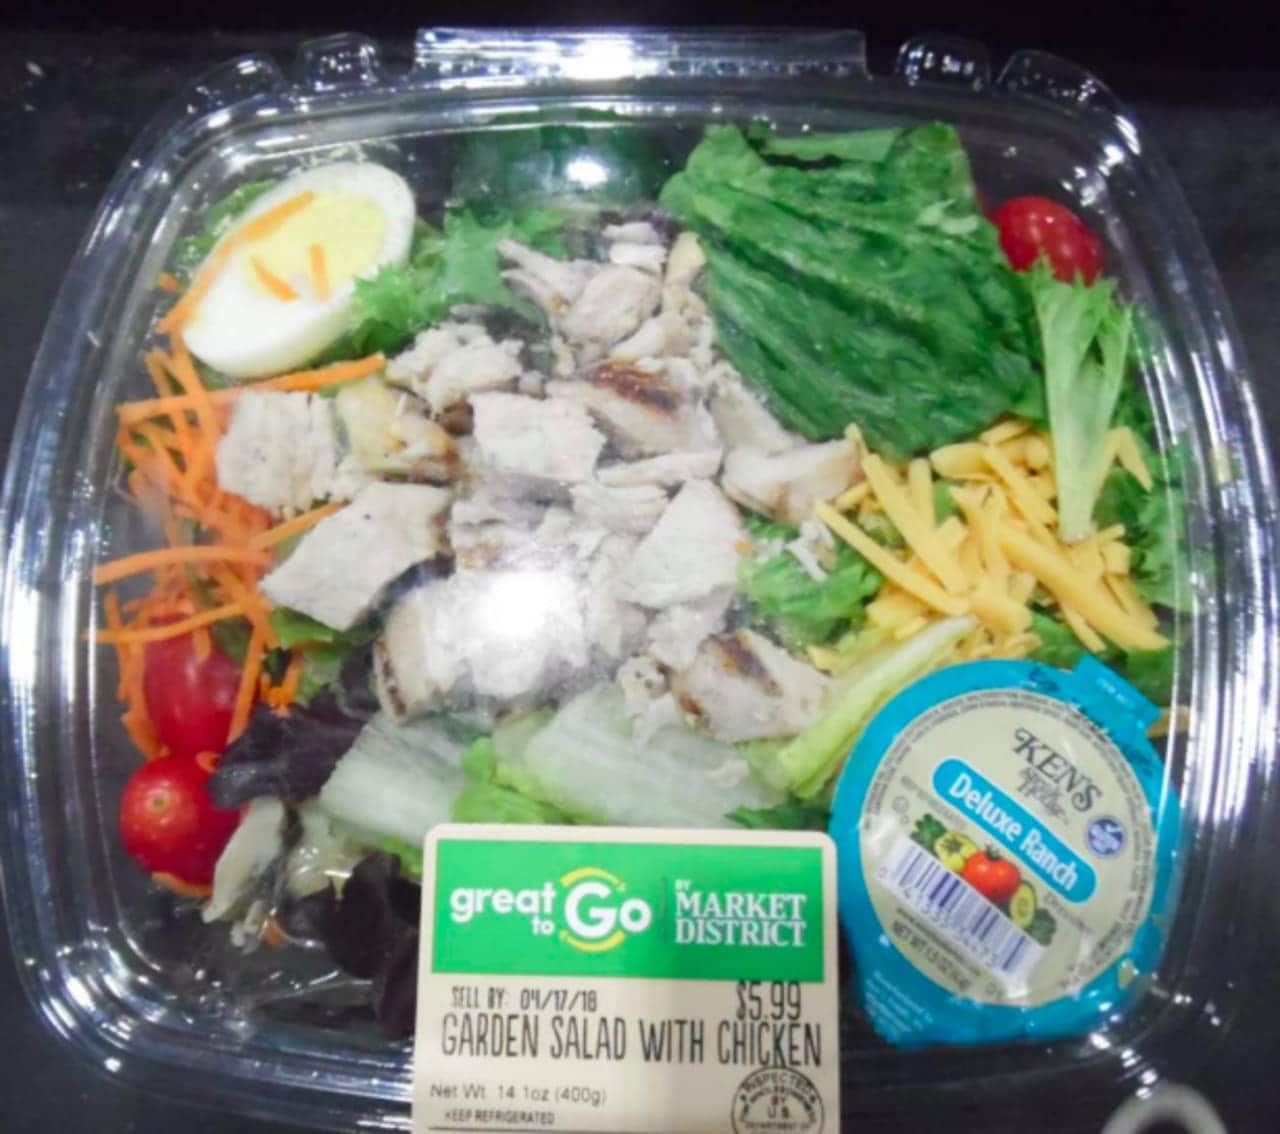 A manufacturer is voluntarily recalling approximately 8,757 pounds of ready-to-eat salad products that may be contaminated with E. coli, according to the USDA.